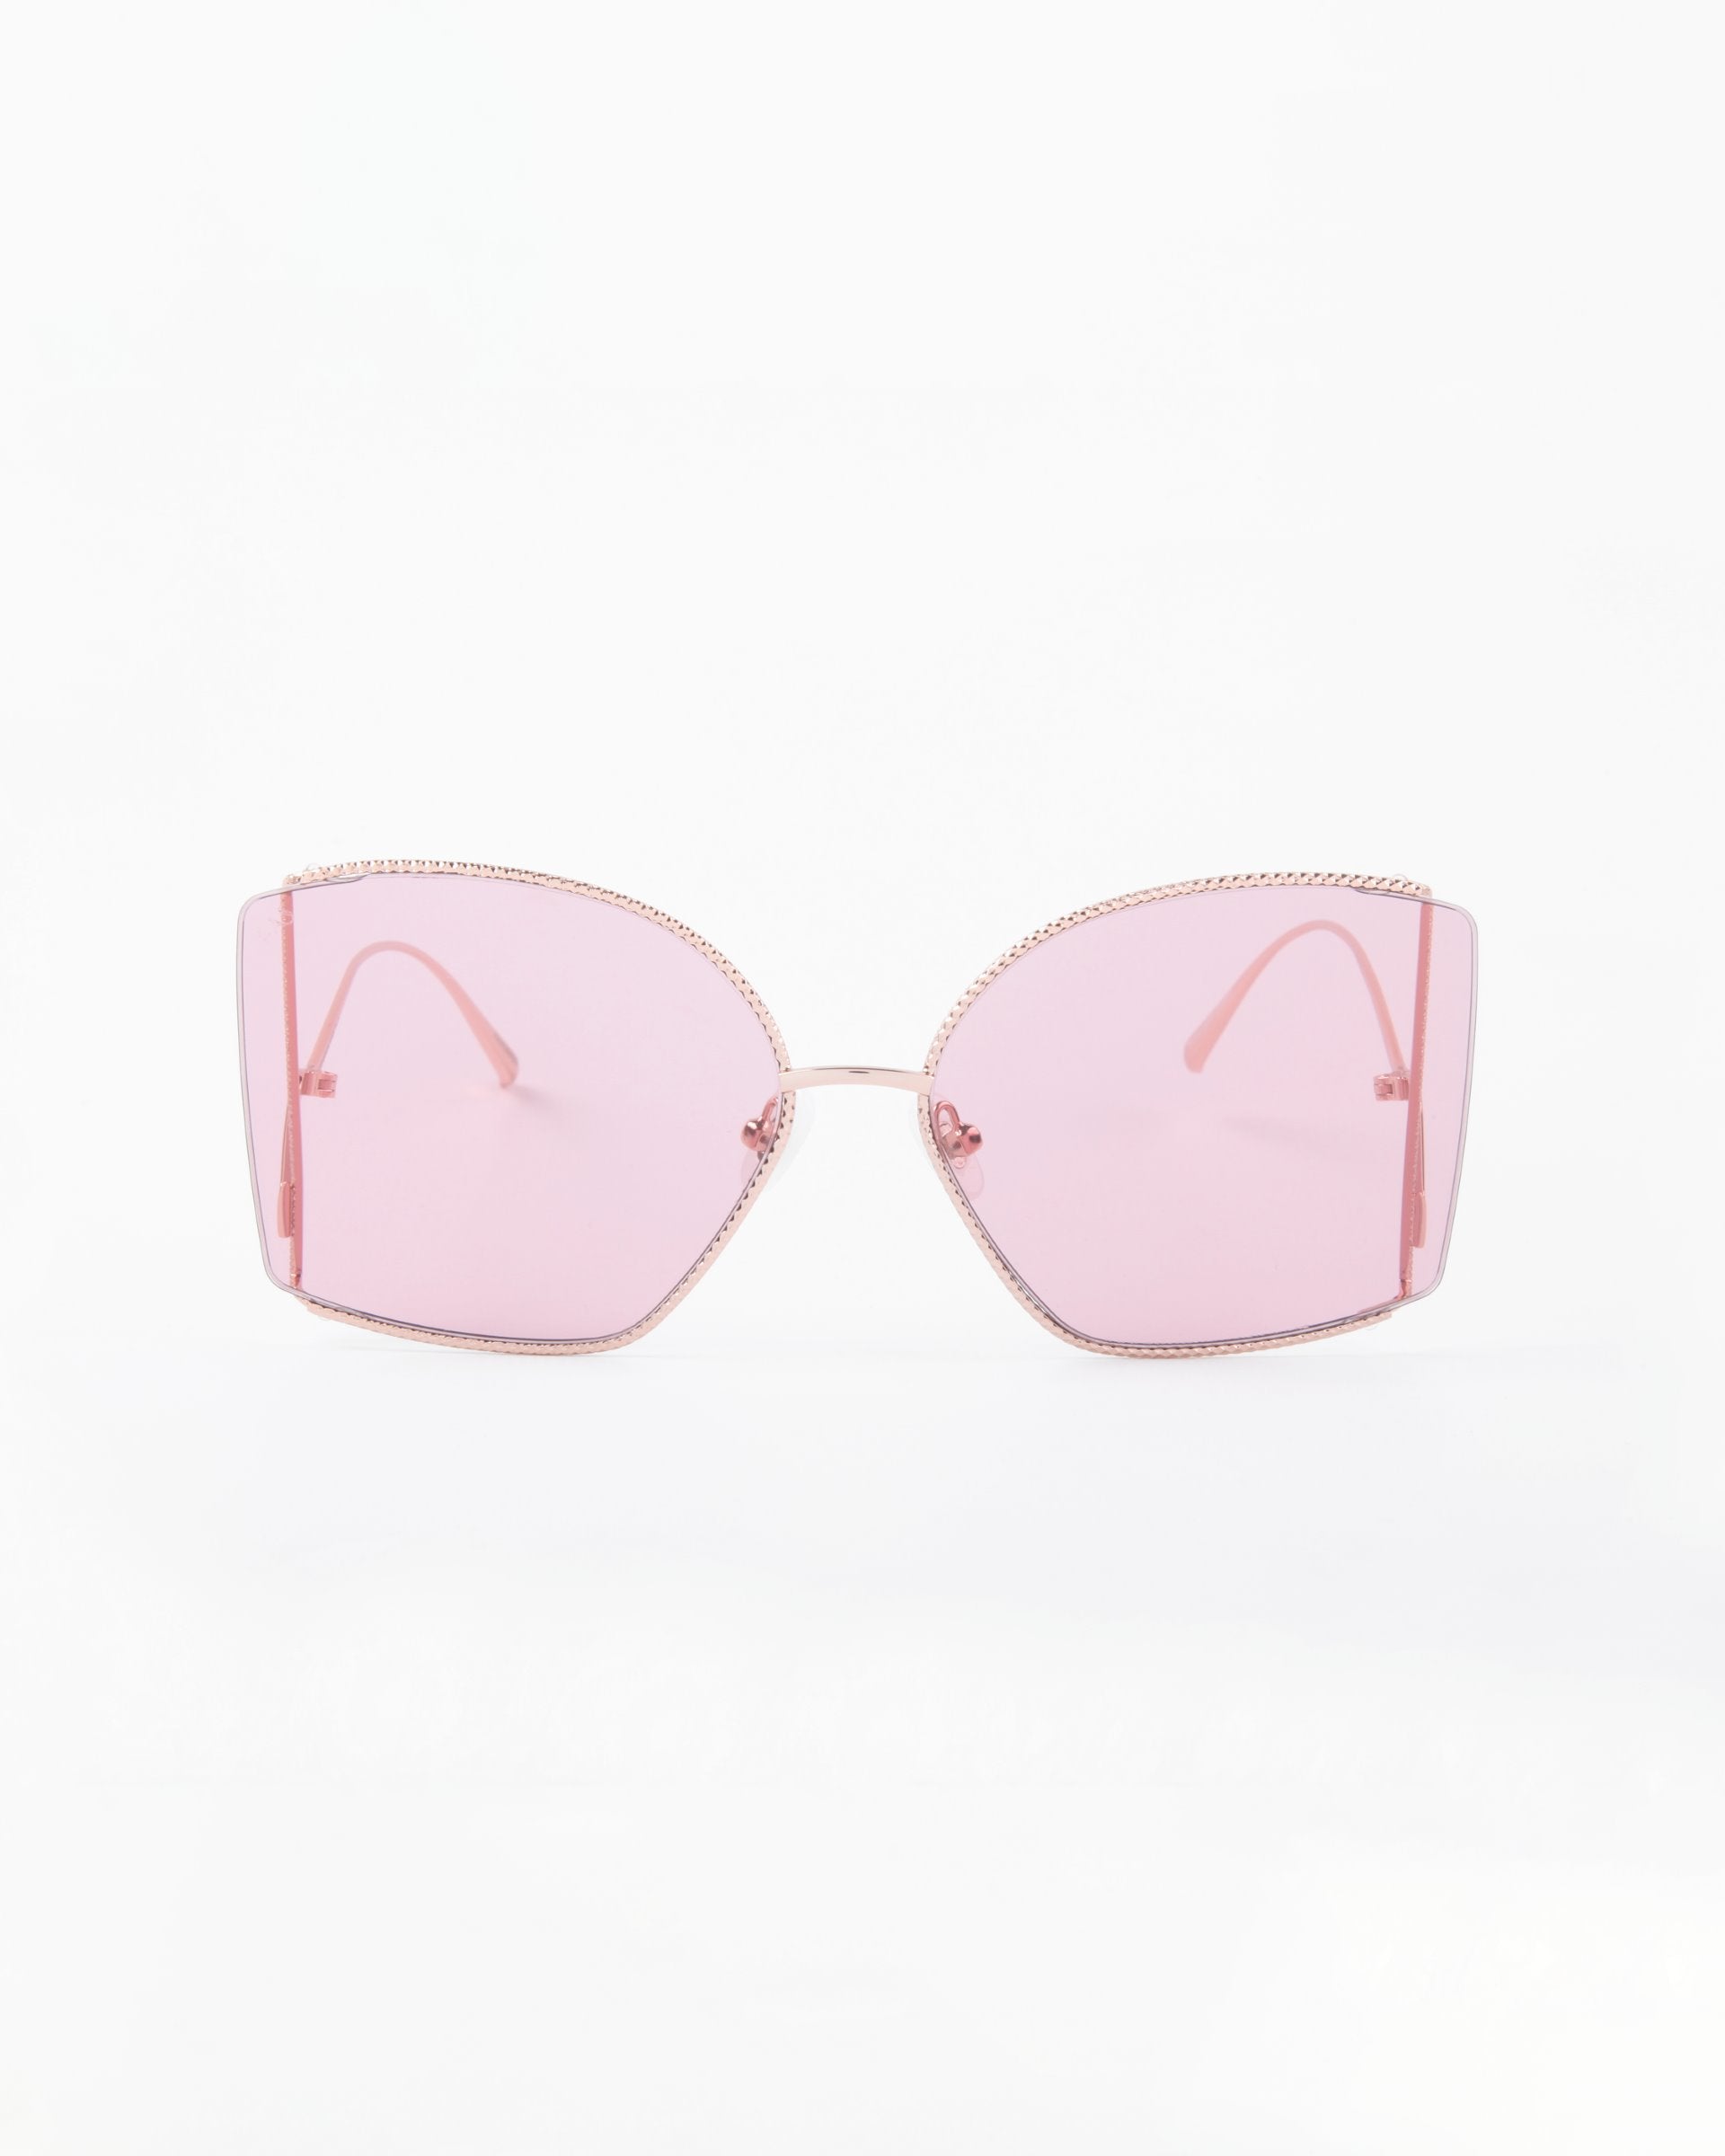 A pair of Dixie oversized, square-framed sunglasses with pink-tinted, shatter-resistant nylon lenses and thin, handmade gold-plated temples by For Art&#39;s Sake®. The design is minimalistic with a modern and stylish aesthetic that also offers UV protection. The background is plain white.